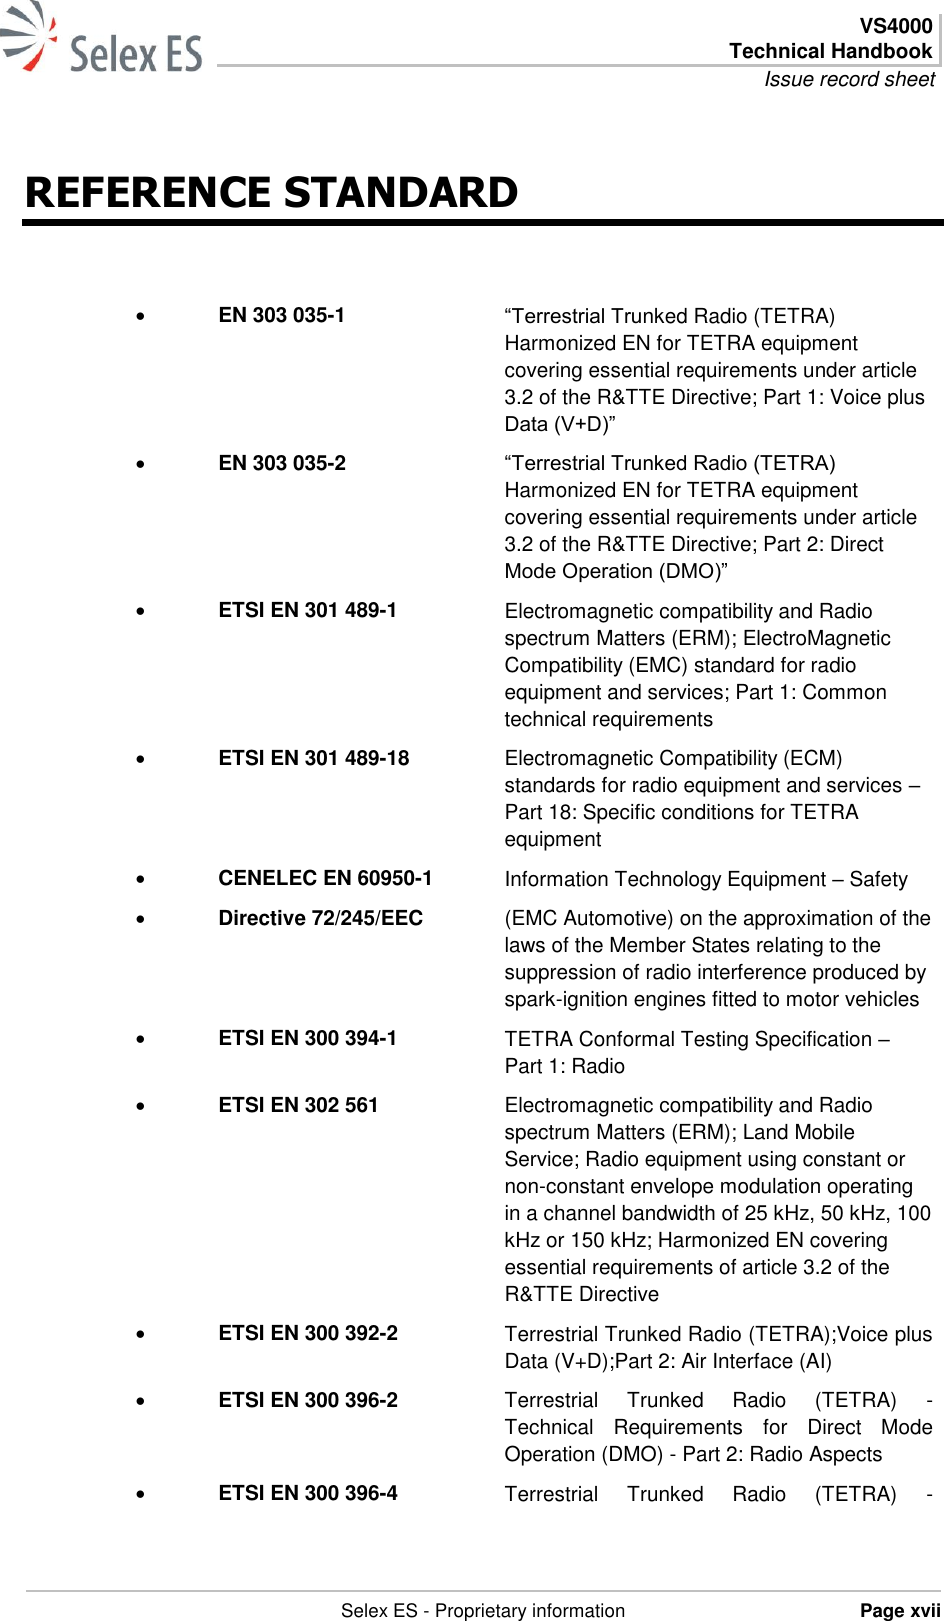  VS4000 Technical Handbook Issue record sheet   Selex ES - Proprietary information Page xvii  REFERENCE STANDARD  EN 303 035-1 “Terrestrial Trunked Radio (TETRA) Harmonized EN for TETRA equipment covering essential requirements under article 3.2 of the R&amp;TTE Directive; Part 1: Voice plus Data (V+D)”  EN 303 035-2 “Terrestrial Trunked Radio (TETRA) Harmonized EN for TETRA equipment covering essential requirements under article 3.2 of the R&amp;TTE Directive; Part 2: Direct Mode Operation (DMO)”  ETSI EN 301 489-1 Electromagnetic compatibility and Radio spectrum Matters (ERM); ElectroMagnetic Compatibility (EMC) standard for radio equipment and services; Part 1: Common technical requirements  ETSI EN 301 489-18  Electromagnetic Compatibility (ECM) standards for radio equipment and services – Part 18: Specific conditions for TETRA equipment  CENELEC EN 60950-1 Information Technology Equipment – Safety  Directive 72/245/EEC (EMC Automotive) on the approximation of the laws of the Member States relating to the suppression of radio interference produced by spark-ignition engines fitted to motor vehicles  ETSI EN 300 394-1 TETRA Conformal Testing Specification – Part 1: Radio  ETSI EN 302 561 Electromagnetic compatibility and Radio spectrum Matters (ERM); Land Mobile Service; Radio equipment using constant or non-constant envelope modulation operating in a channel bandwidth of 25 kHz, 50 kHz, 100 kHz or 150 kHz; Harmonized EN covering essential requirements of article 3.2 of the R&amp;TTE Directive  ETSI EN 300 392-2 Terrestrial Trunked Radio (TETRA);Voice plus Data (V+D);Part 2: Air Interface (AI)  ETSI EN 300 396-2 Terrestrial  Trunked  Radio  (TETRA)  - Technical  Requirements  for  Direct  Mode Operation (DMO) - Part 2: Radio Aspects  ETSI EN 300 396-4 Terrestrial  Trunked  Radio  (TETRA)  - 